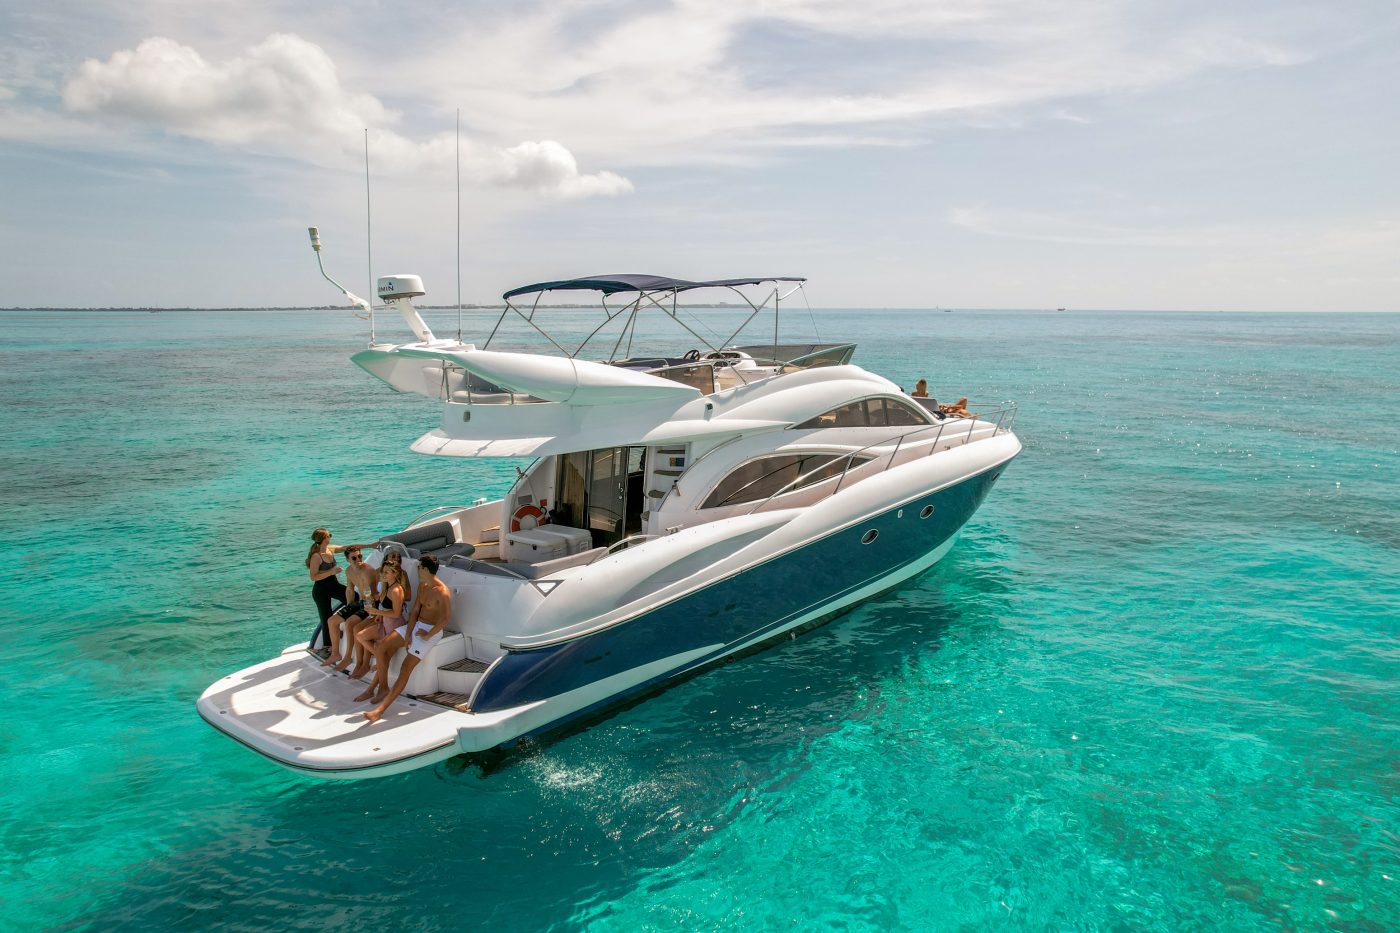 Sunseeker Luxury Yacht Charters to Cozumel, Isla Mujeres and Cancun Tulum Boat Rentals main